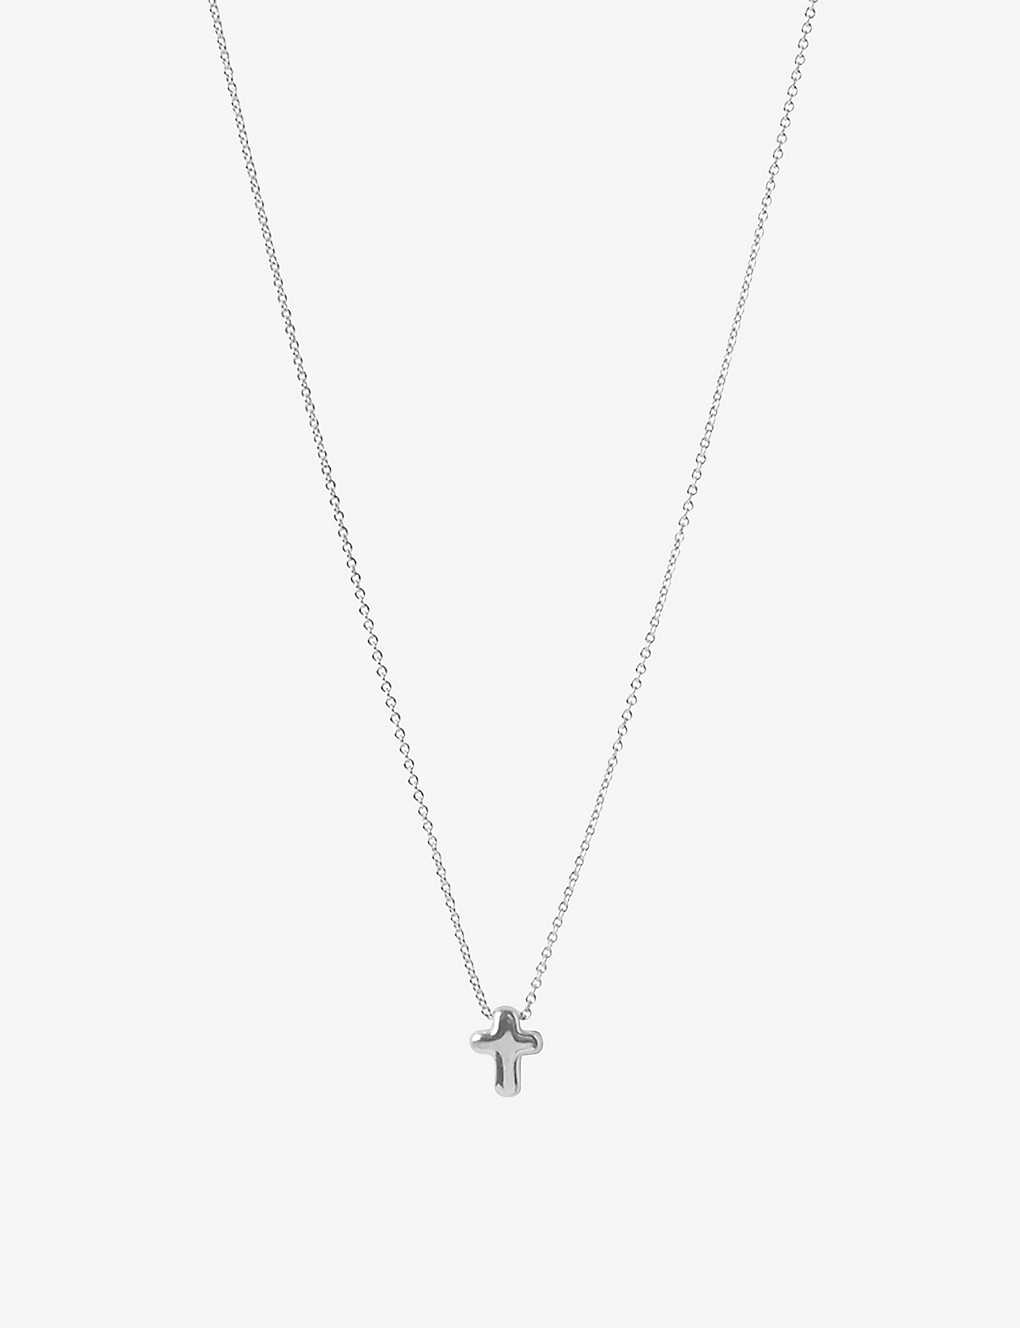 THE ALKEMISTRY THE ALKEMISTRY WOMEN'S 18CT WHITE GOLD CHUBBY CROSS 18CT WHITE-GOLD PENDANT NECKLACE,64467505